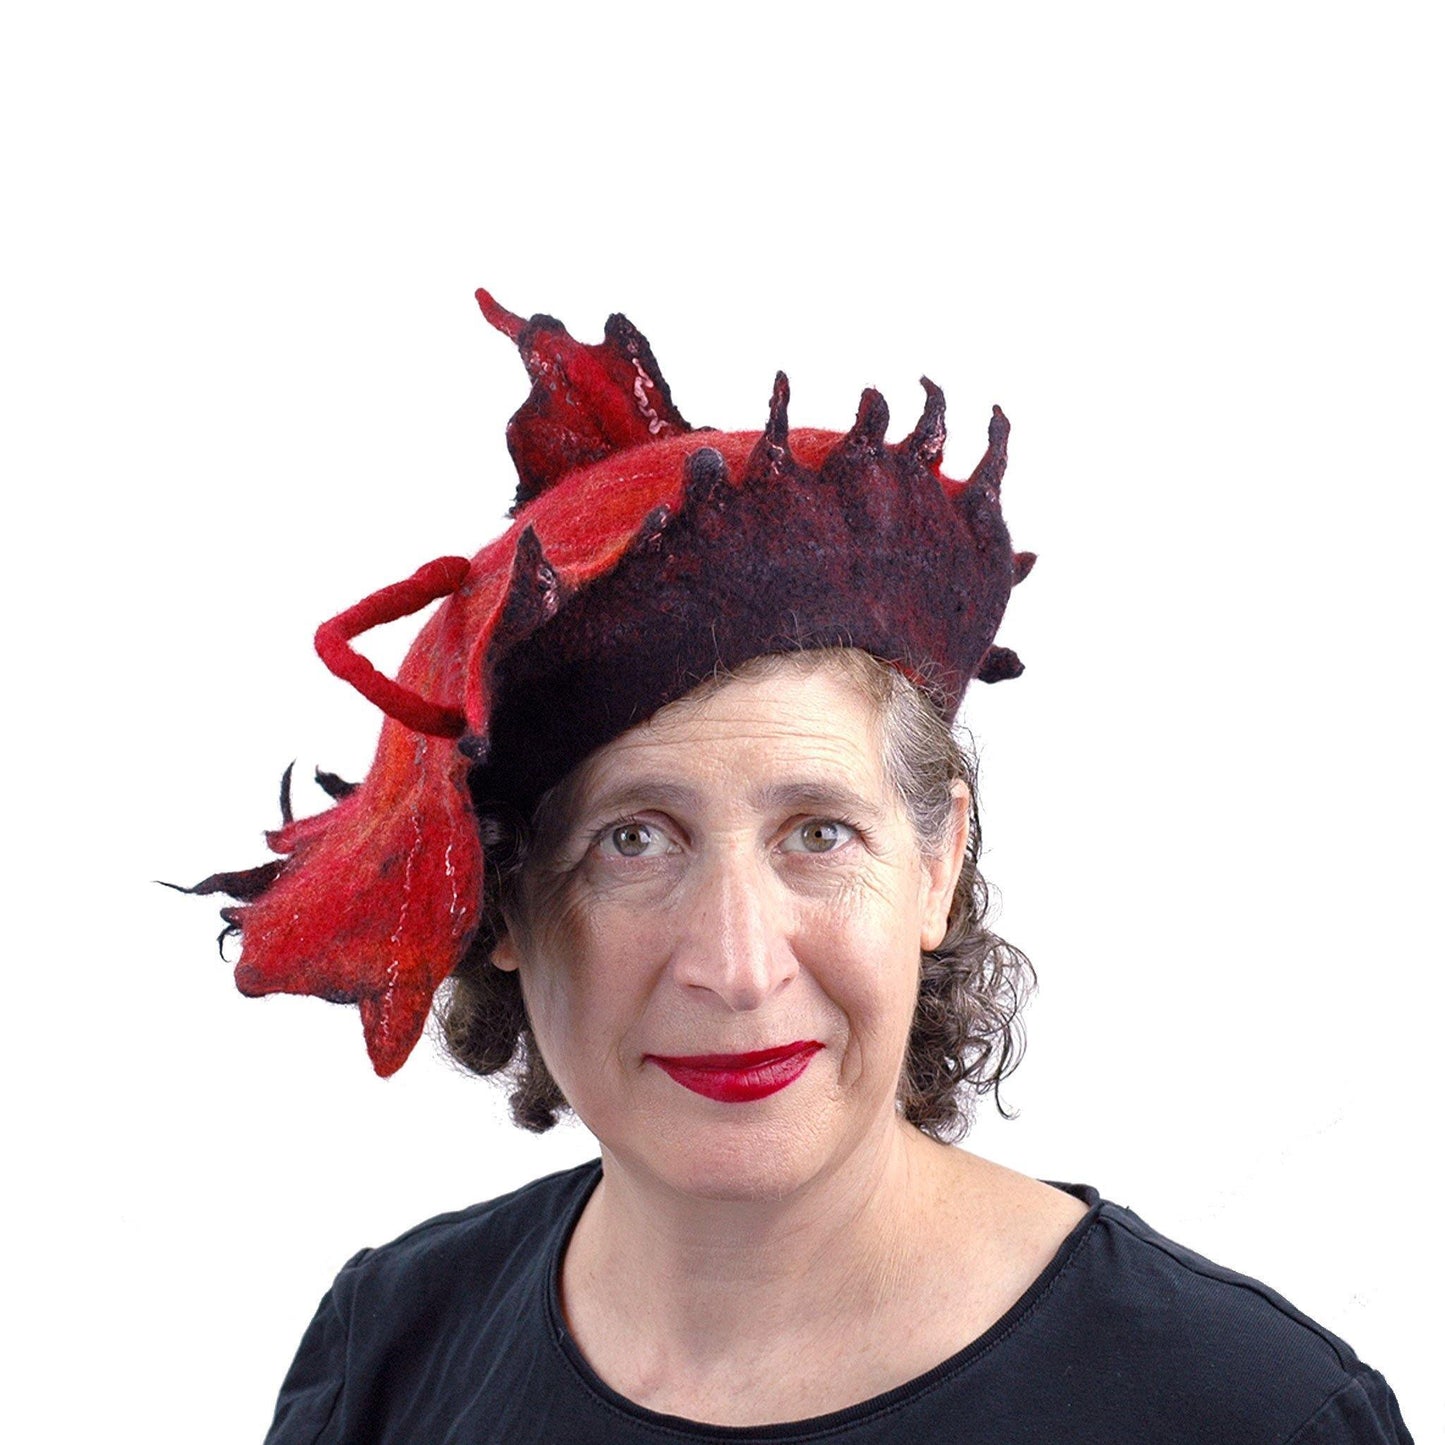 Autumn Inspired Leaf Hat in Red and Black - front view